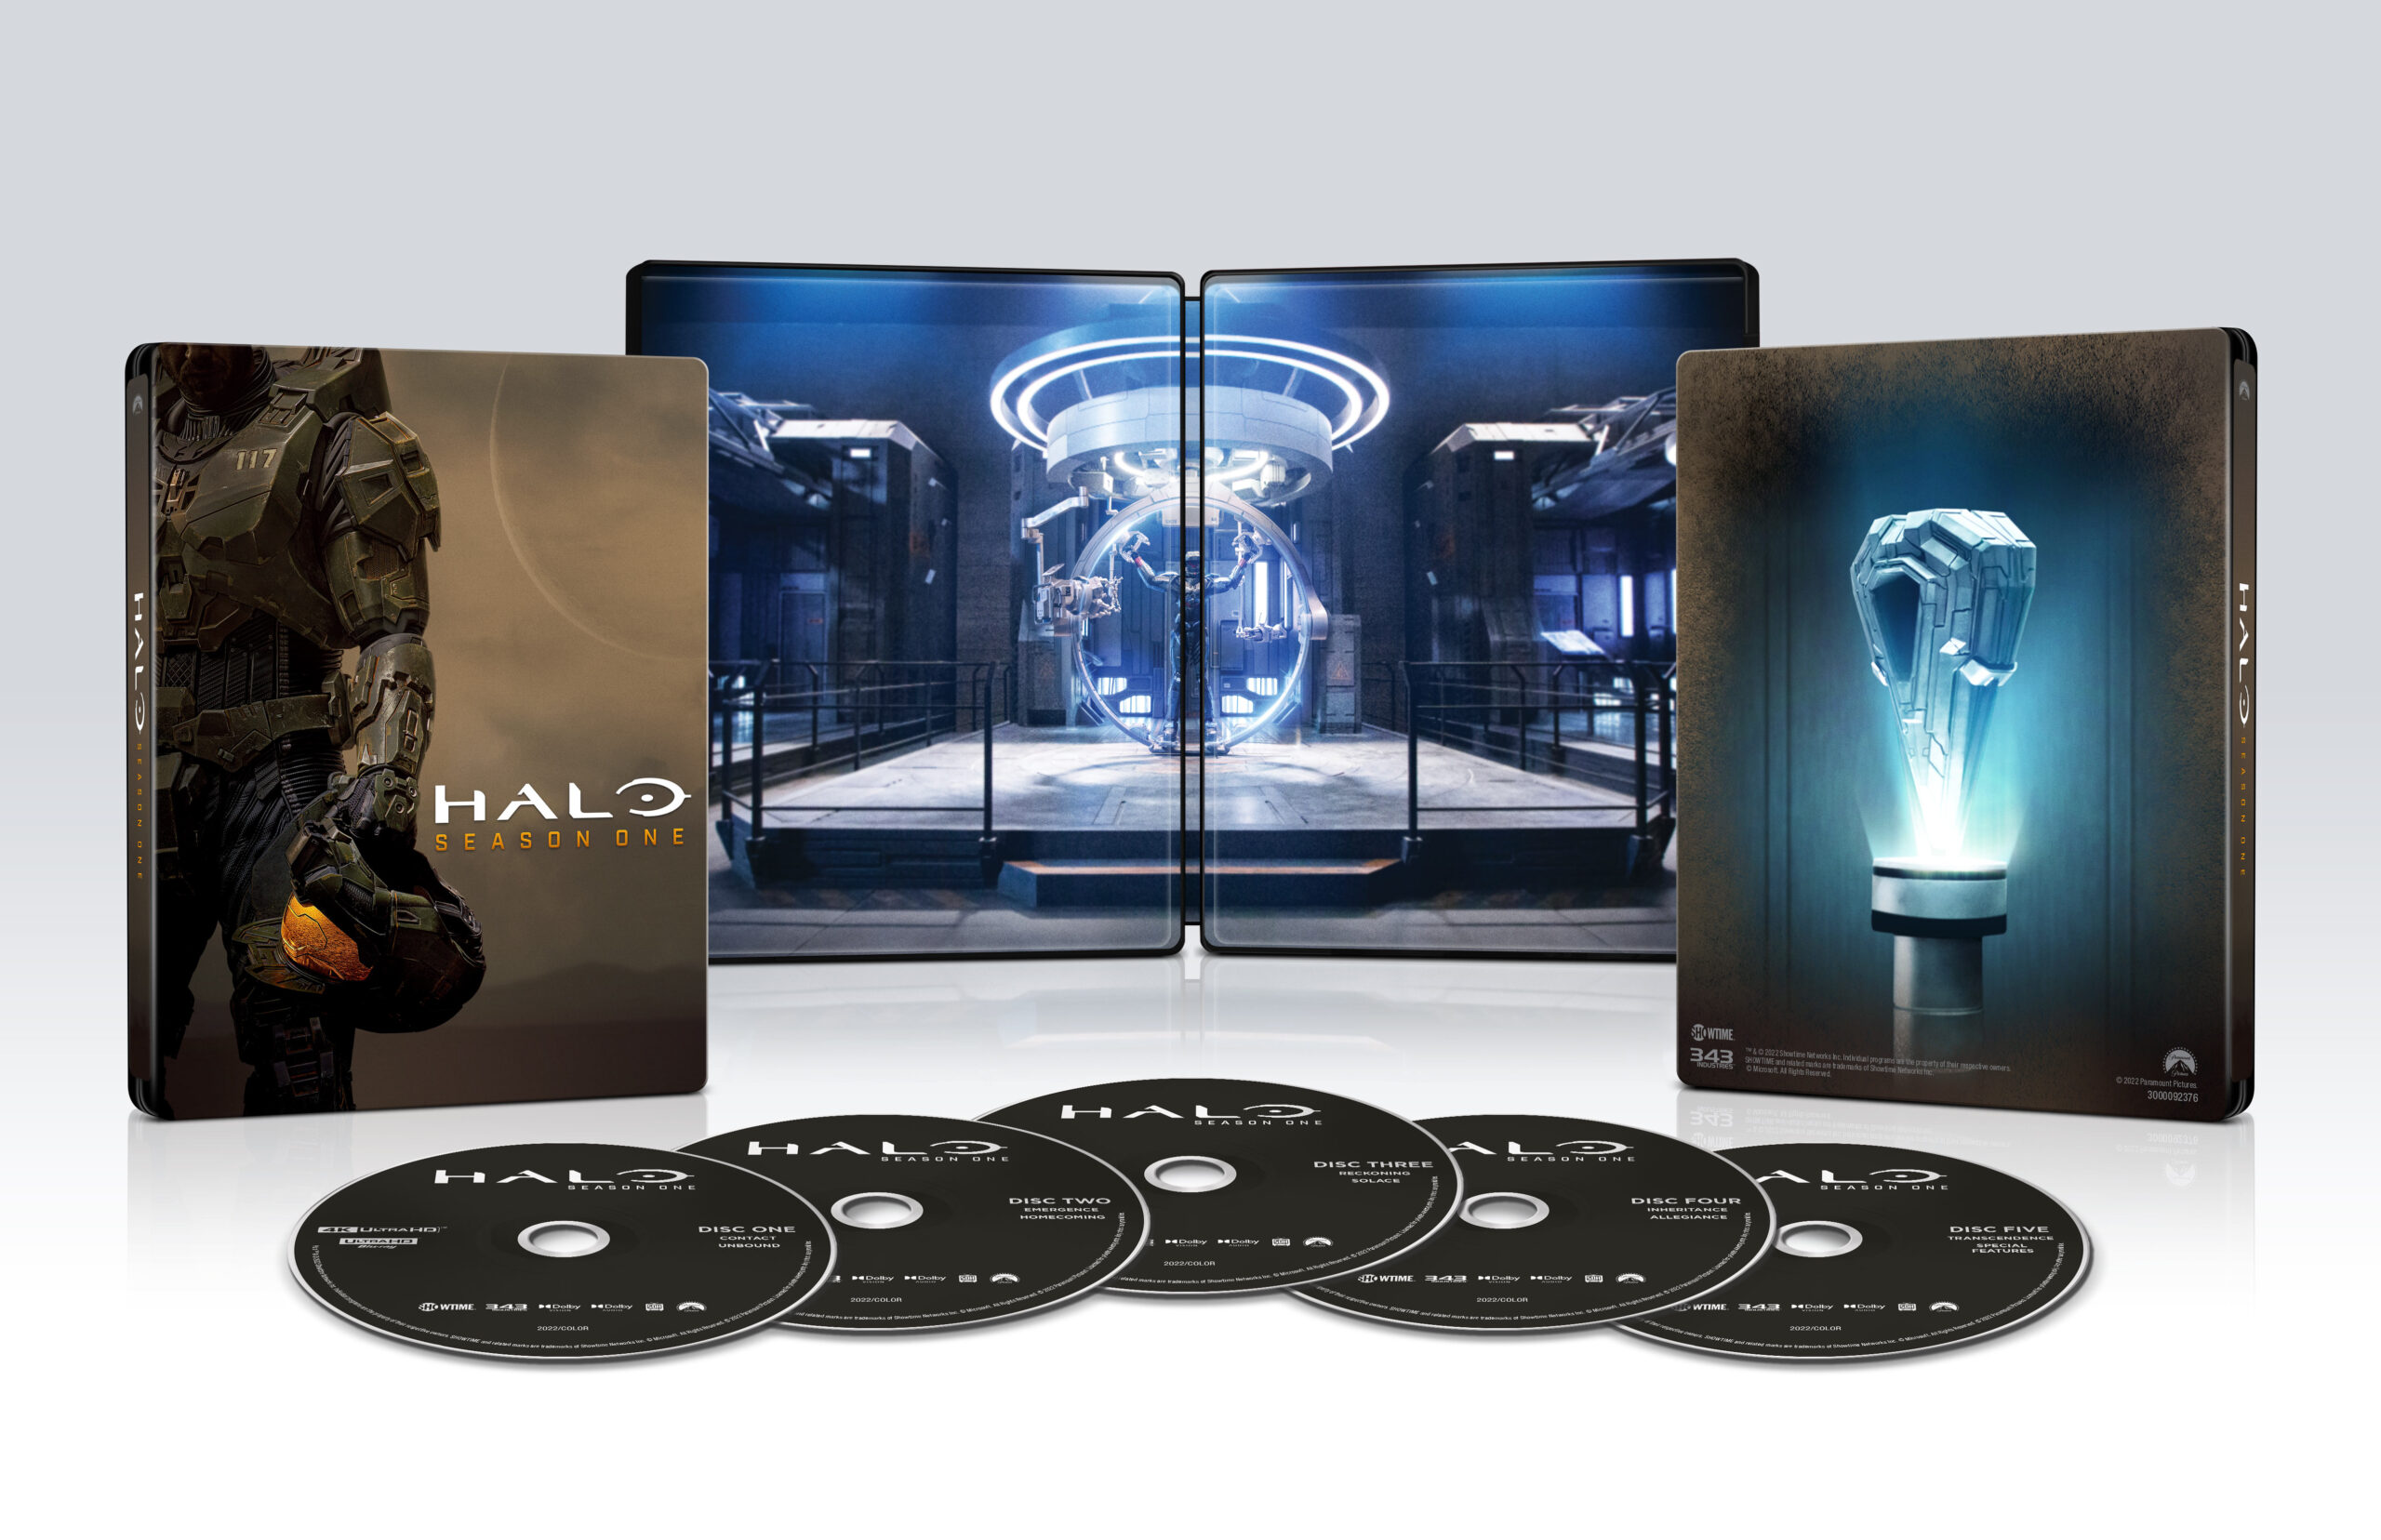 Halo The Series steelbook contents